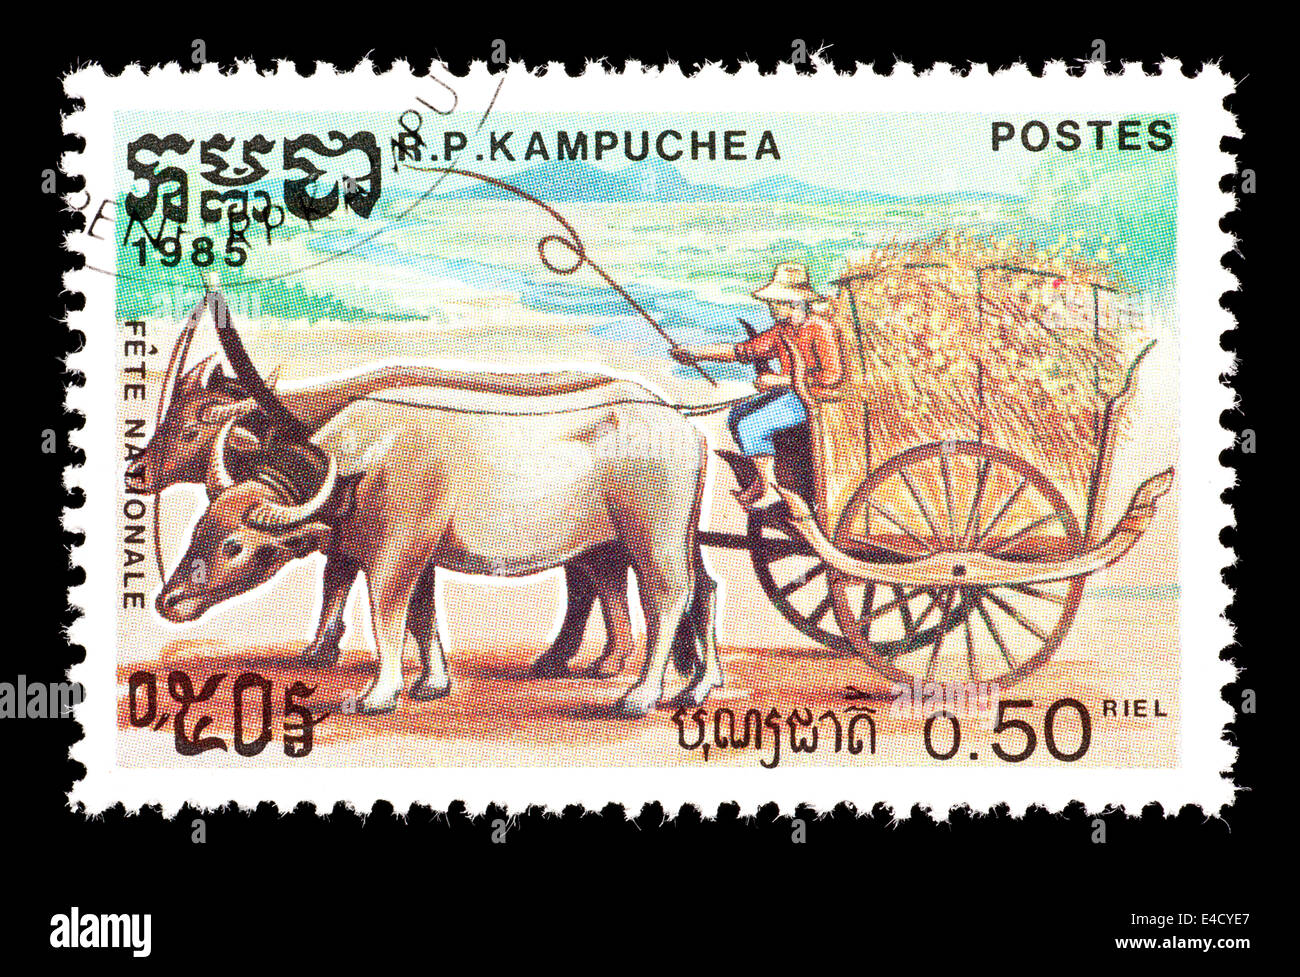 Postage stamp from Cambodia depicting an oxcart. Stock Photo